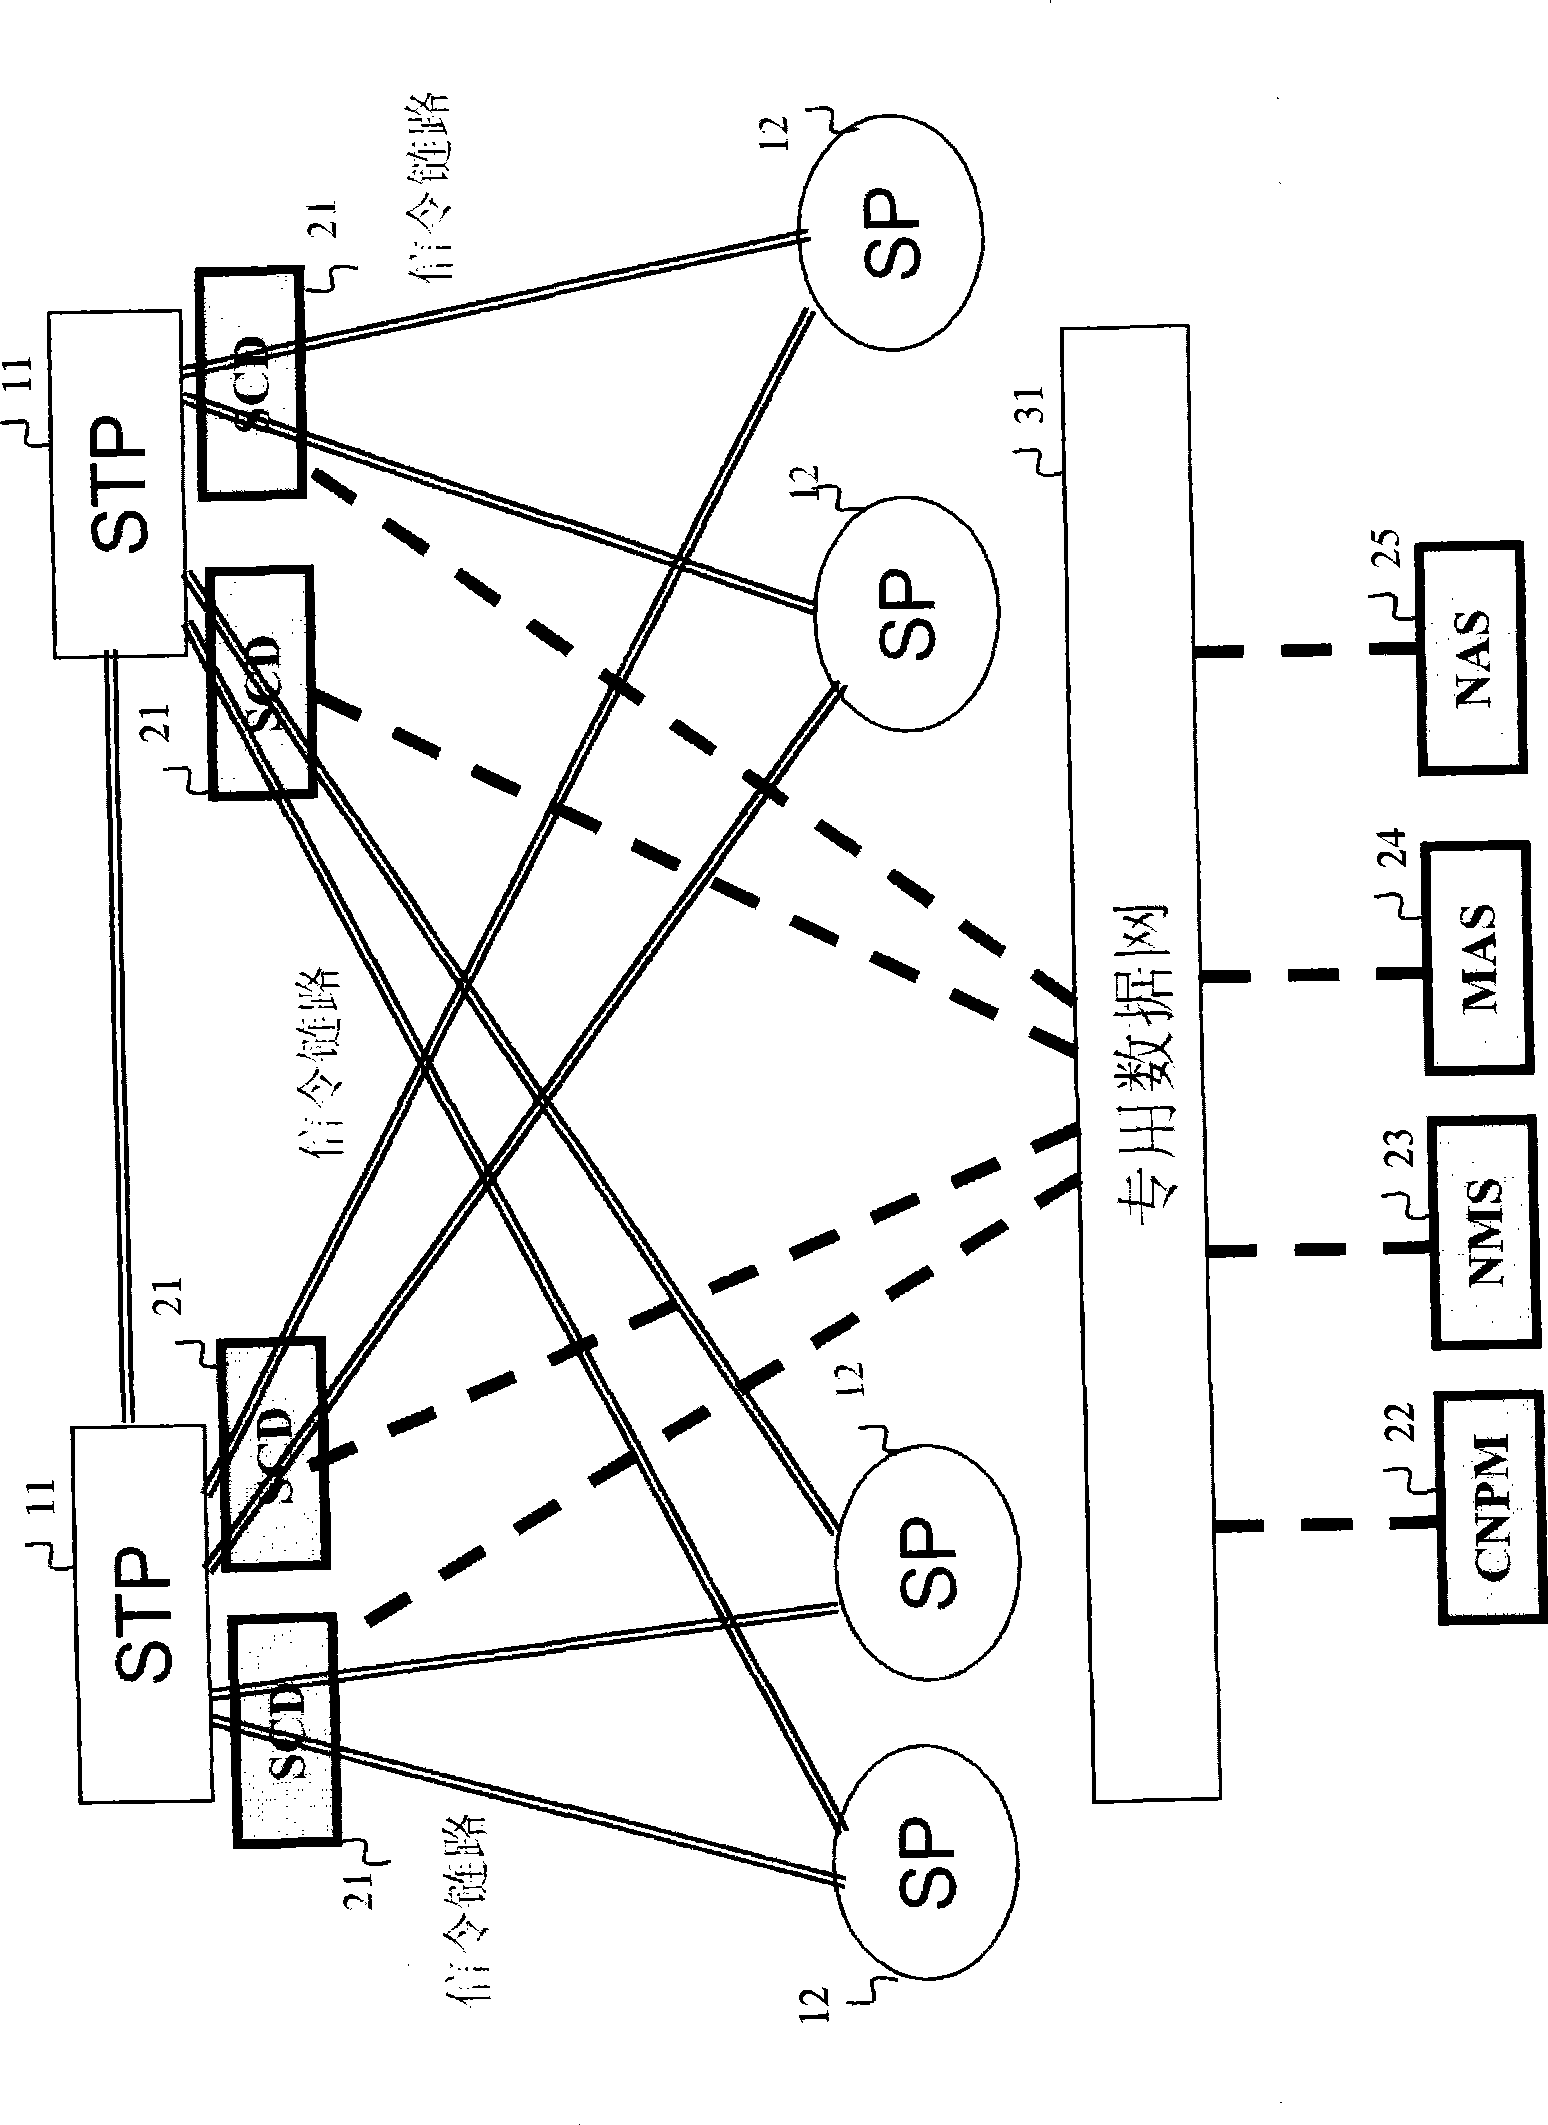 System for implementing telecom value added business based on signaling processing technology